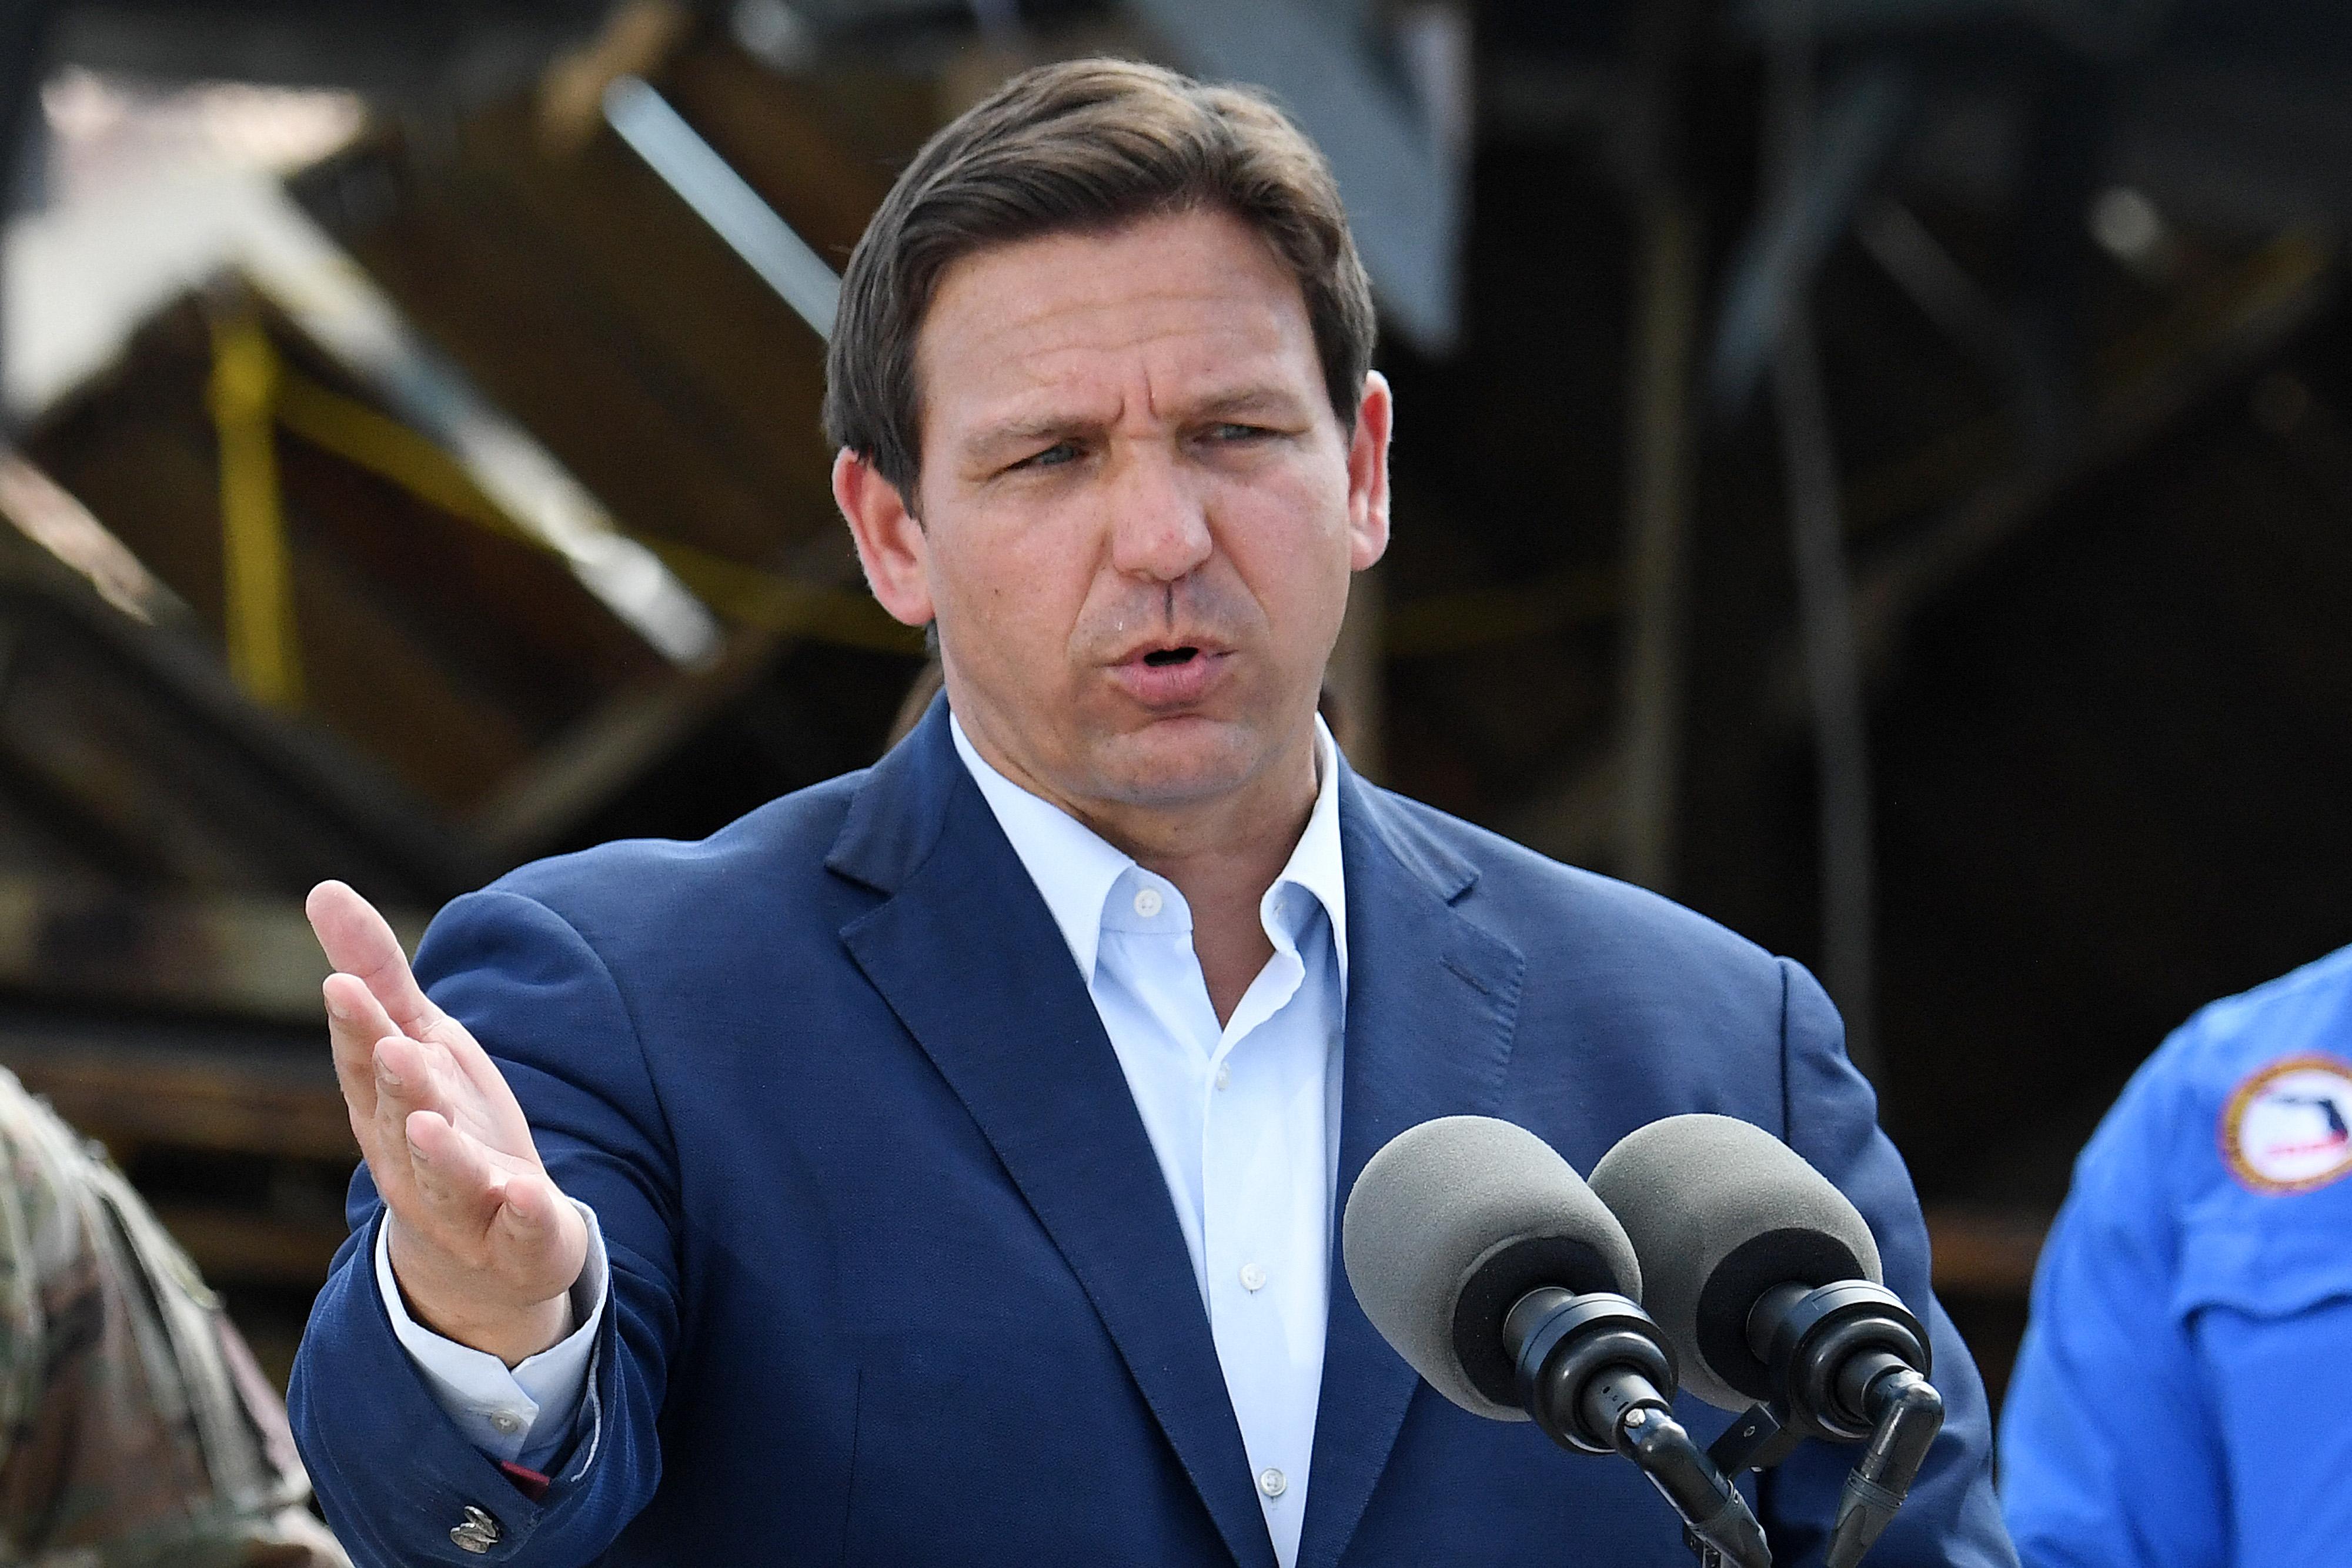 DeSantis gestures with his right hand similar to Donald Trump, wears a suit but no tie.